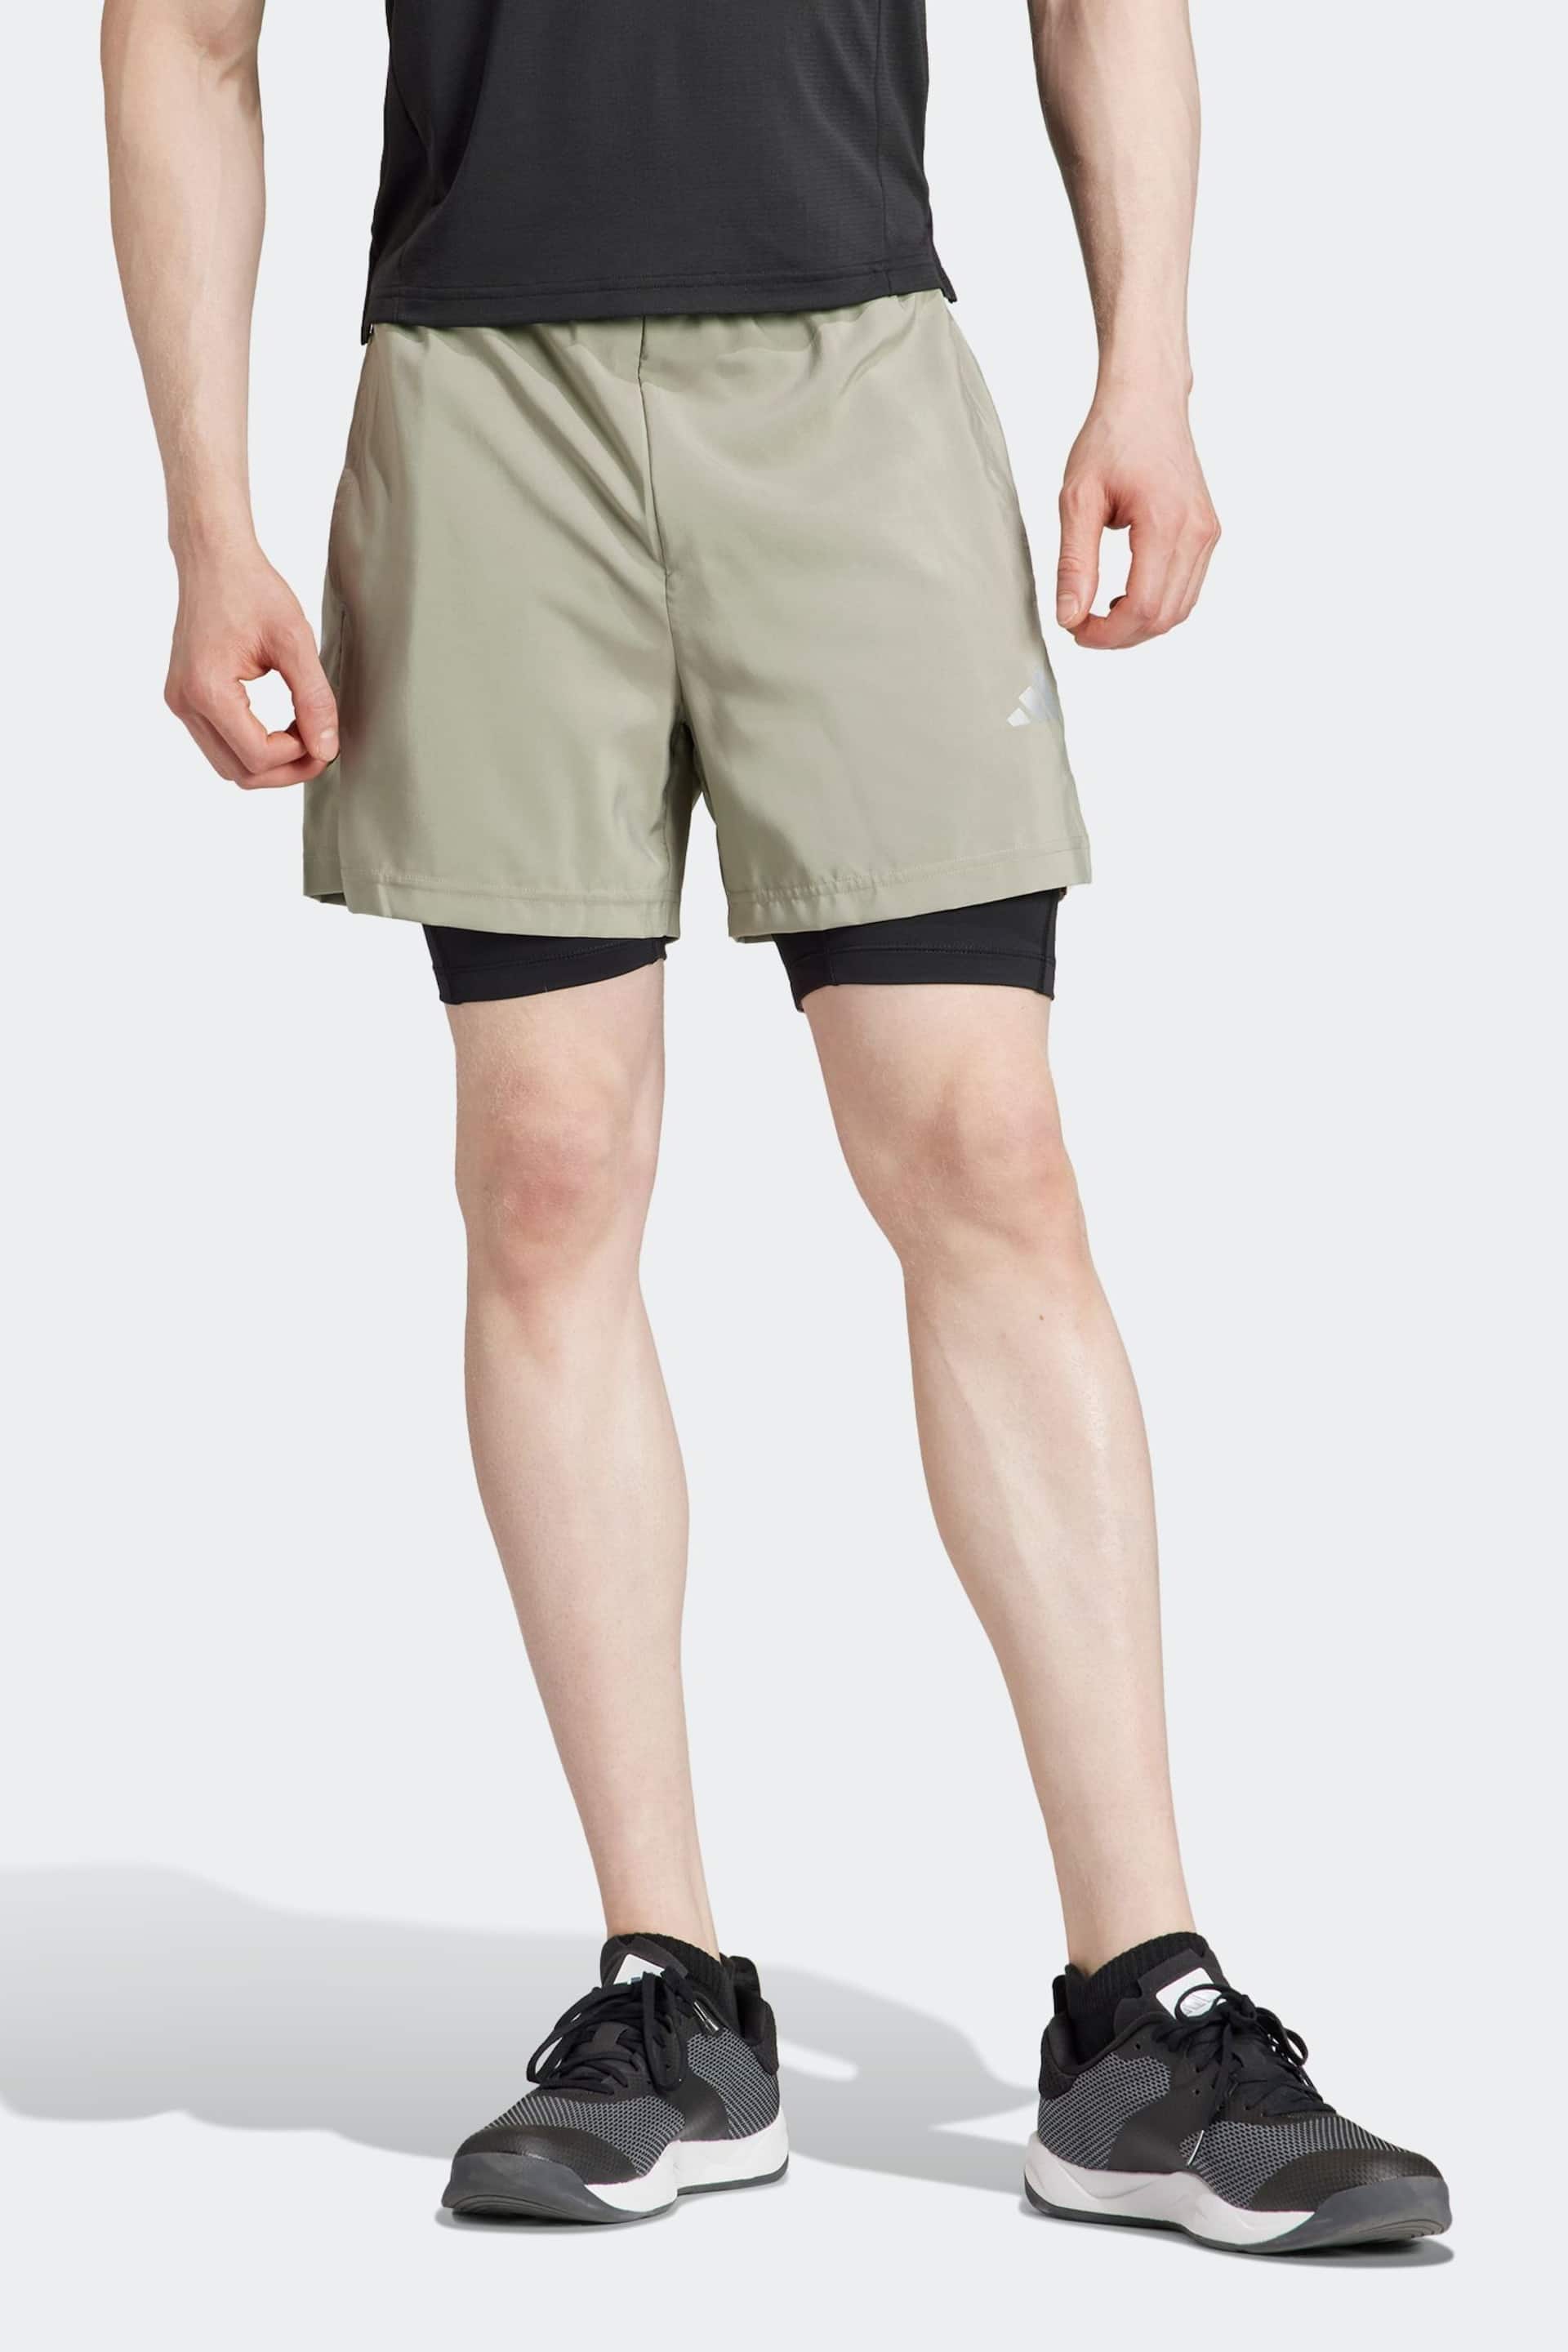 adidas Green Gym Training 2-In-1 Shorts - Image 1 of 6